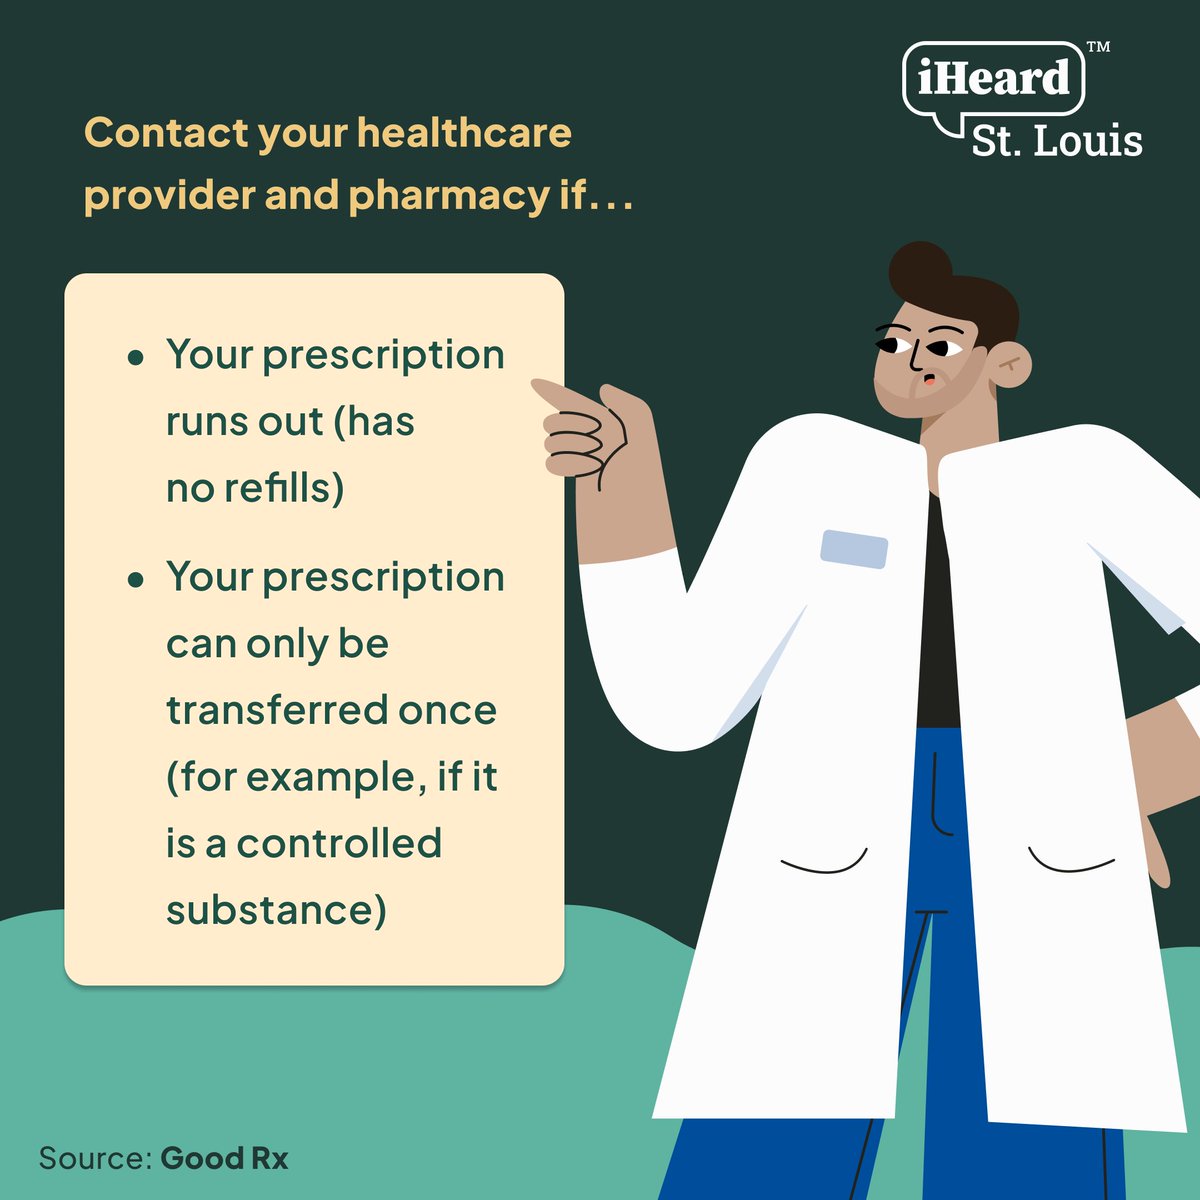 Want to change your pharmacy? It’s easy! Make sure to have info about your medications and insurance with you. Get in touch with your healthcare provider and pharmacy if you have any questions. #iHeardSTL #STL #Pharmacy